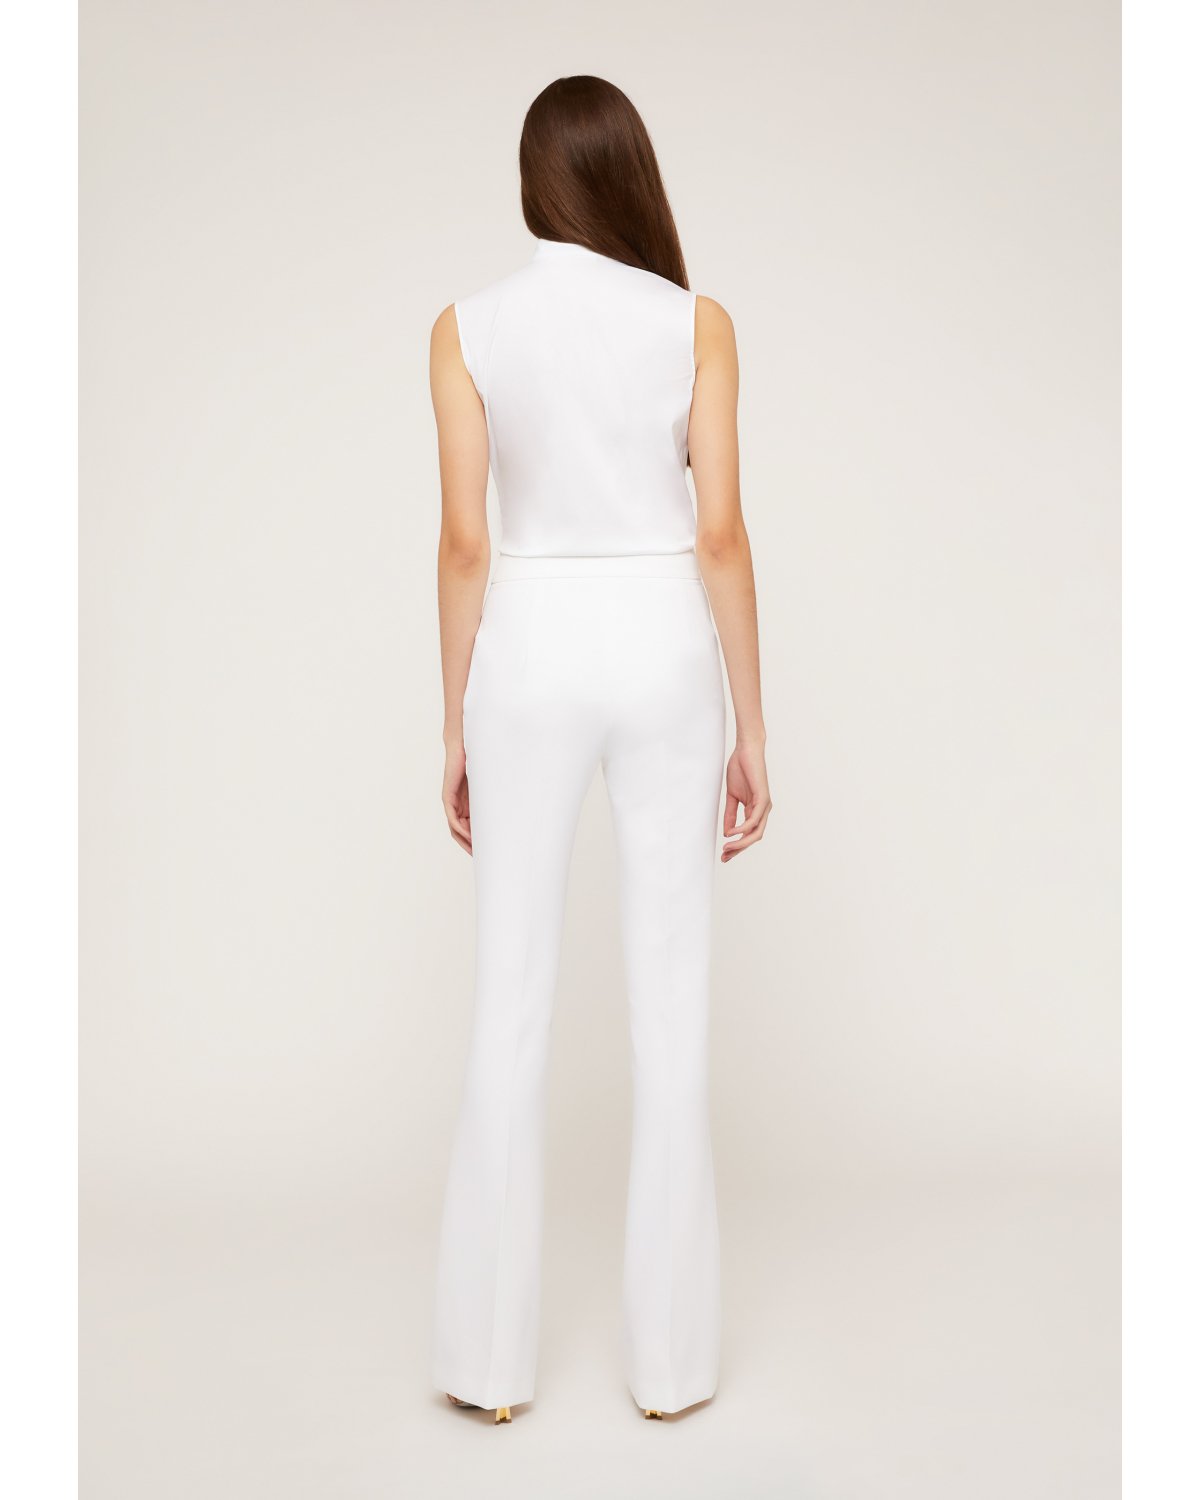 White tight trousers | 73_74 | Genny